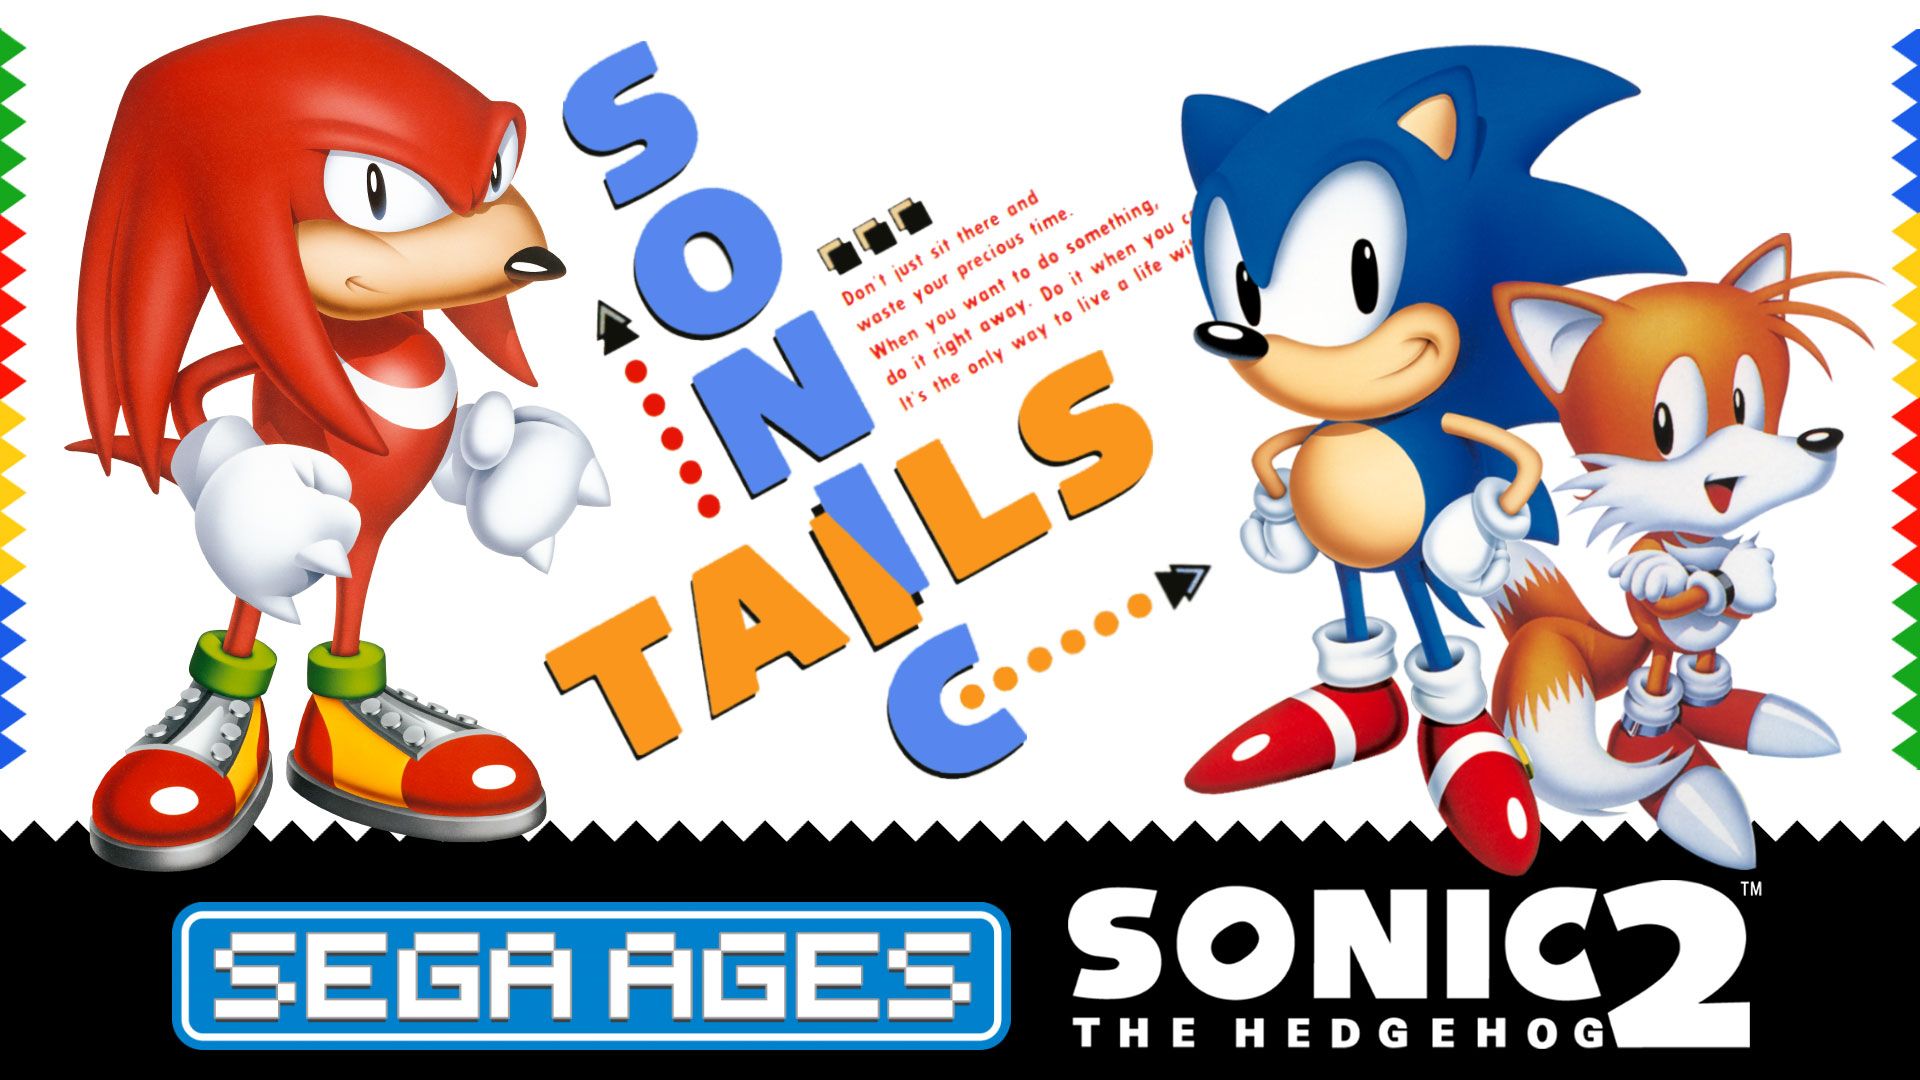 SEGA AGES Sonic The Hedgehog 2 for Nintendo Switch Game Details